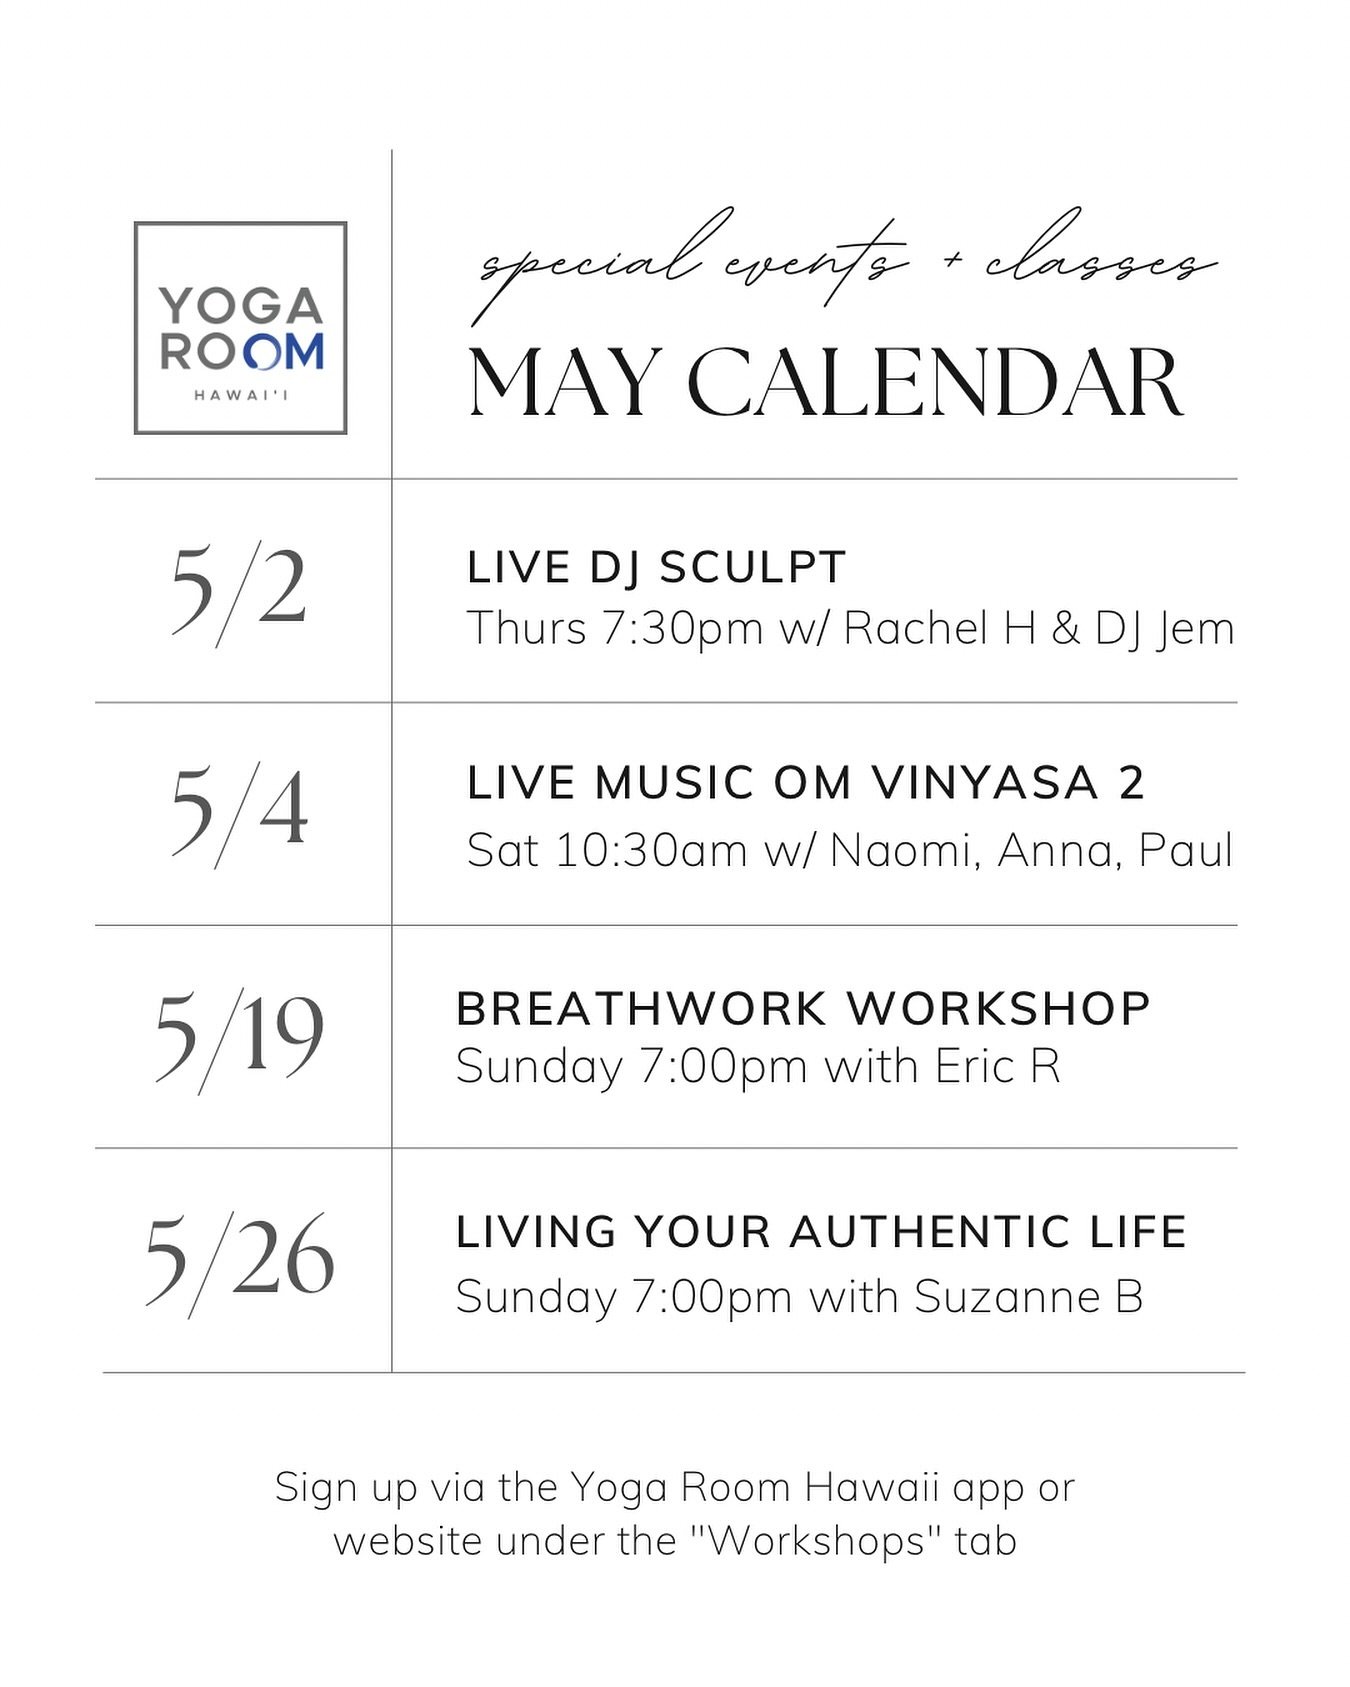 May Calendar

Live music this week!
&mdash; This Thursday at 7:30pm @djjem_ will be accompanying @yogawithrachelhong for a fun live DJ Sculpt class

&mdash; This Saturday at 10:30am @annasachs and @paulkalikohou will be accompanying @na.oms with a so